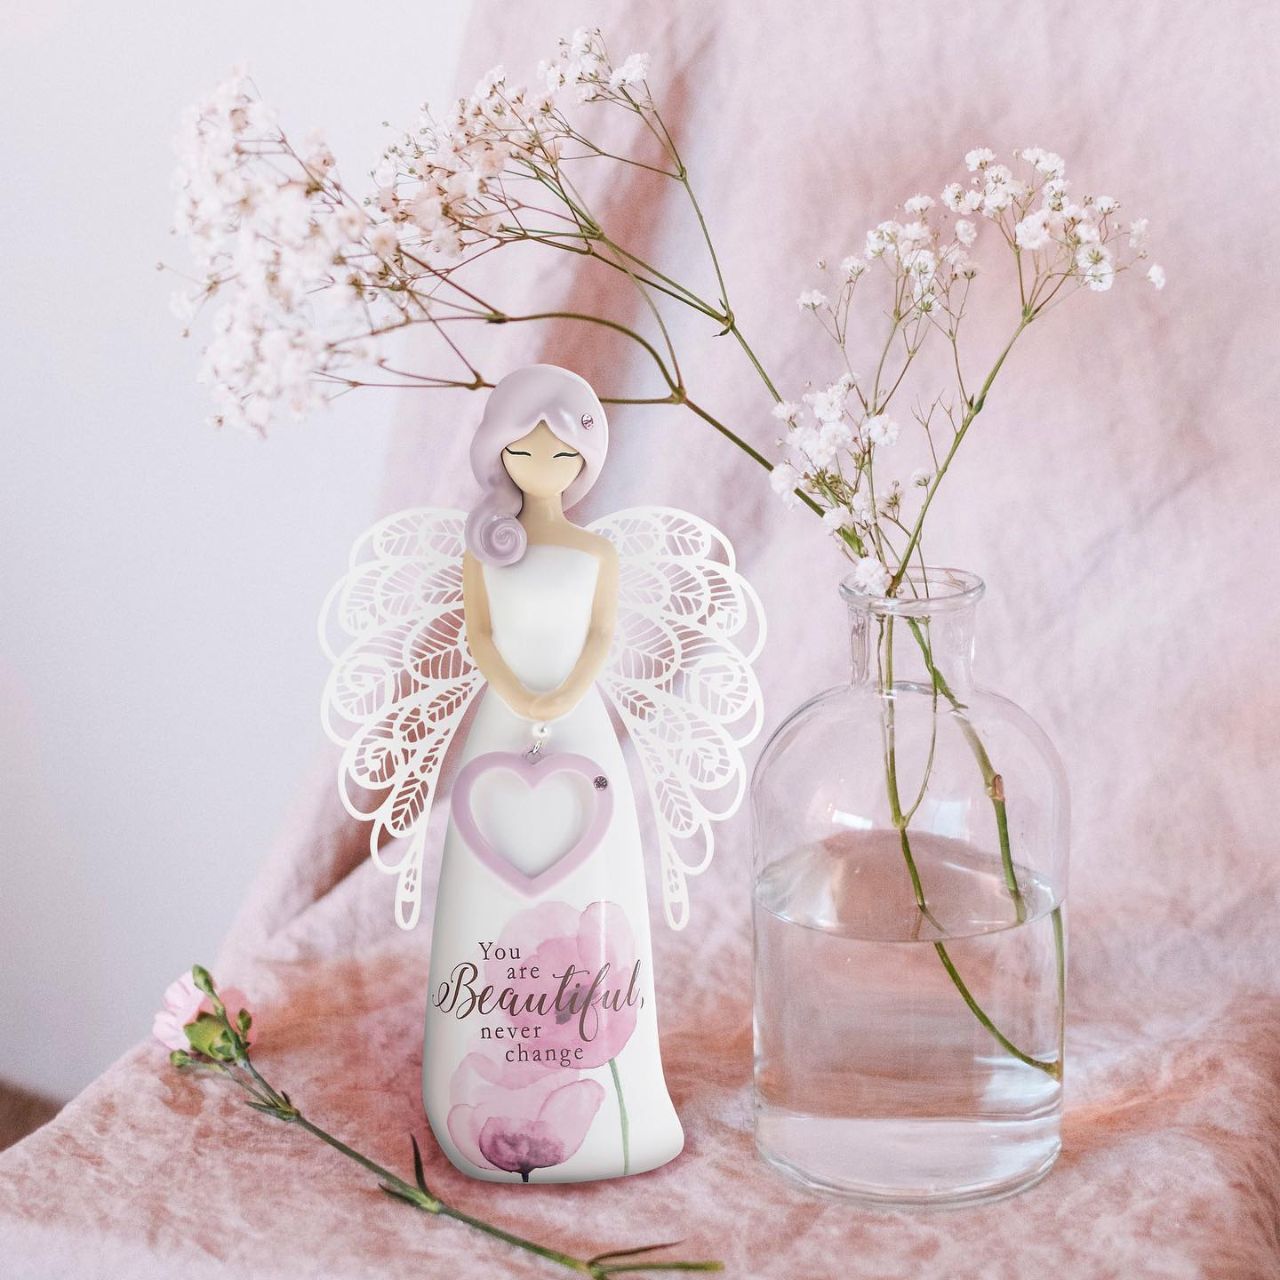 You Are Beautiful Figurine  "You are beautiful never change"  Looking for a thoughtful gift that's both beautiful and meaningful. These stunning angels are the perfect way to show someone special just how much they mean to you.